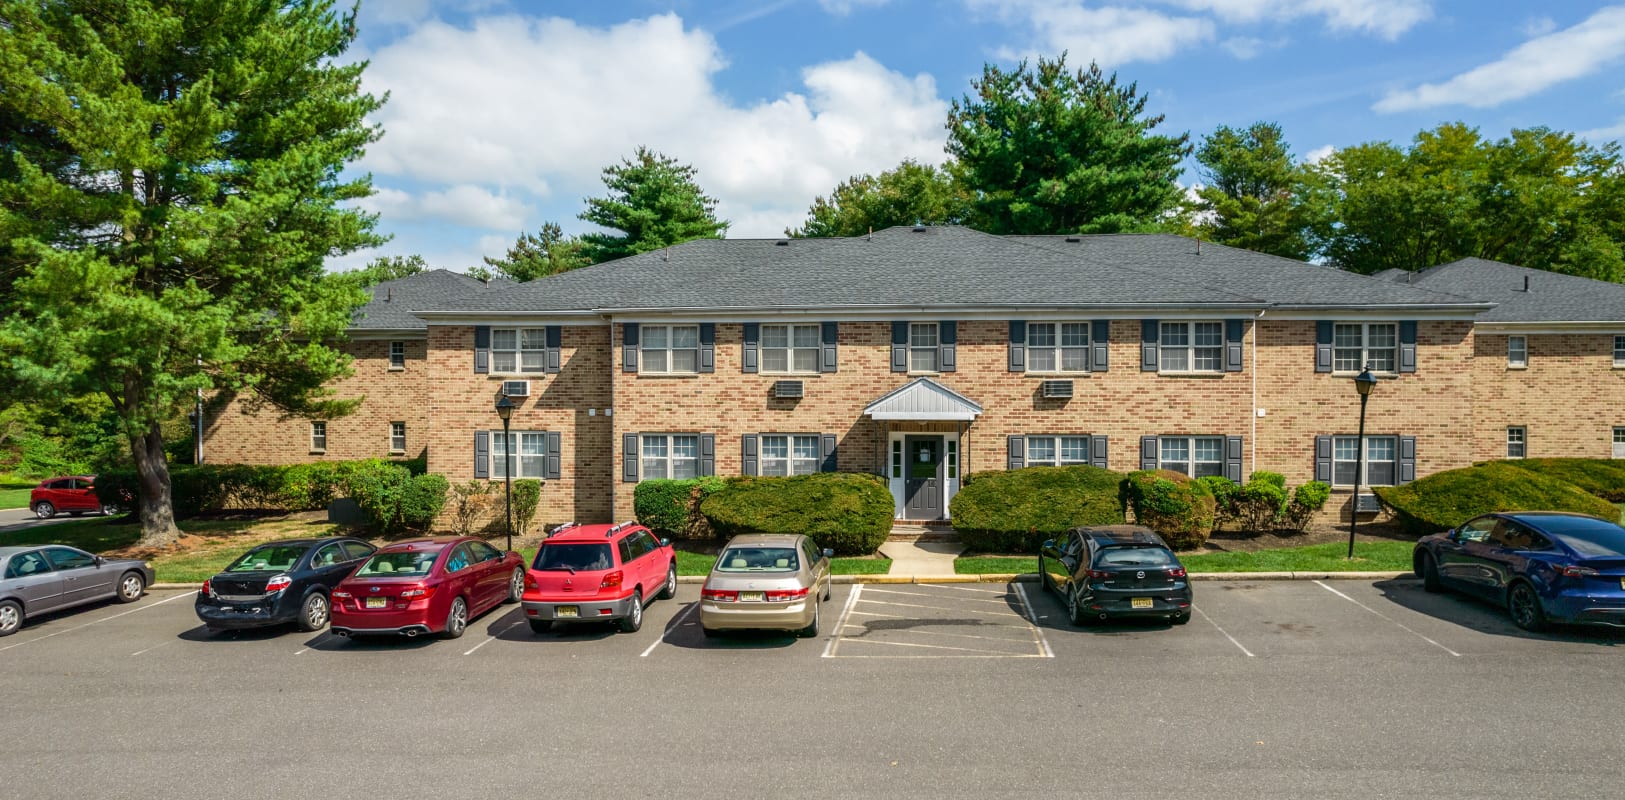 Parking Lot and buildings at Sharon Arms Apartments in Robbinsville, New Jersey